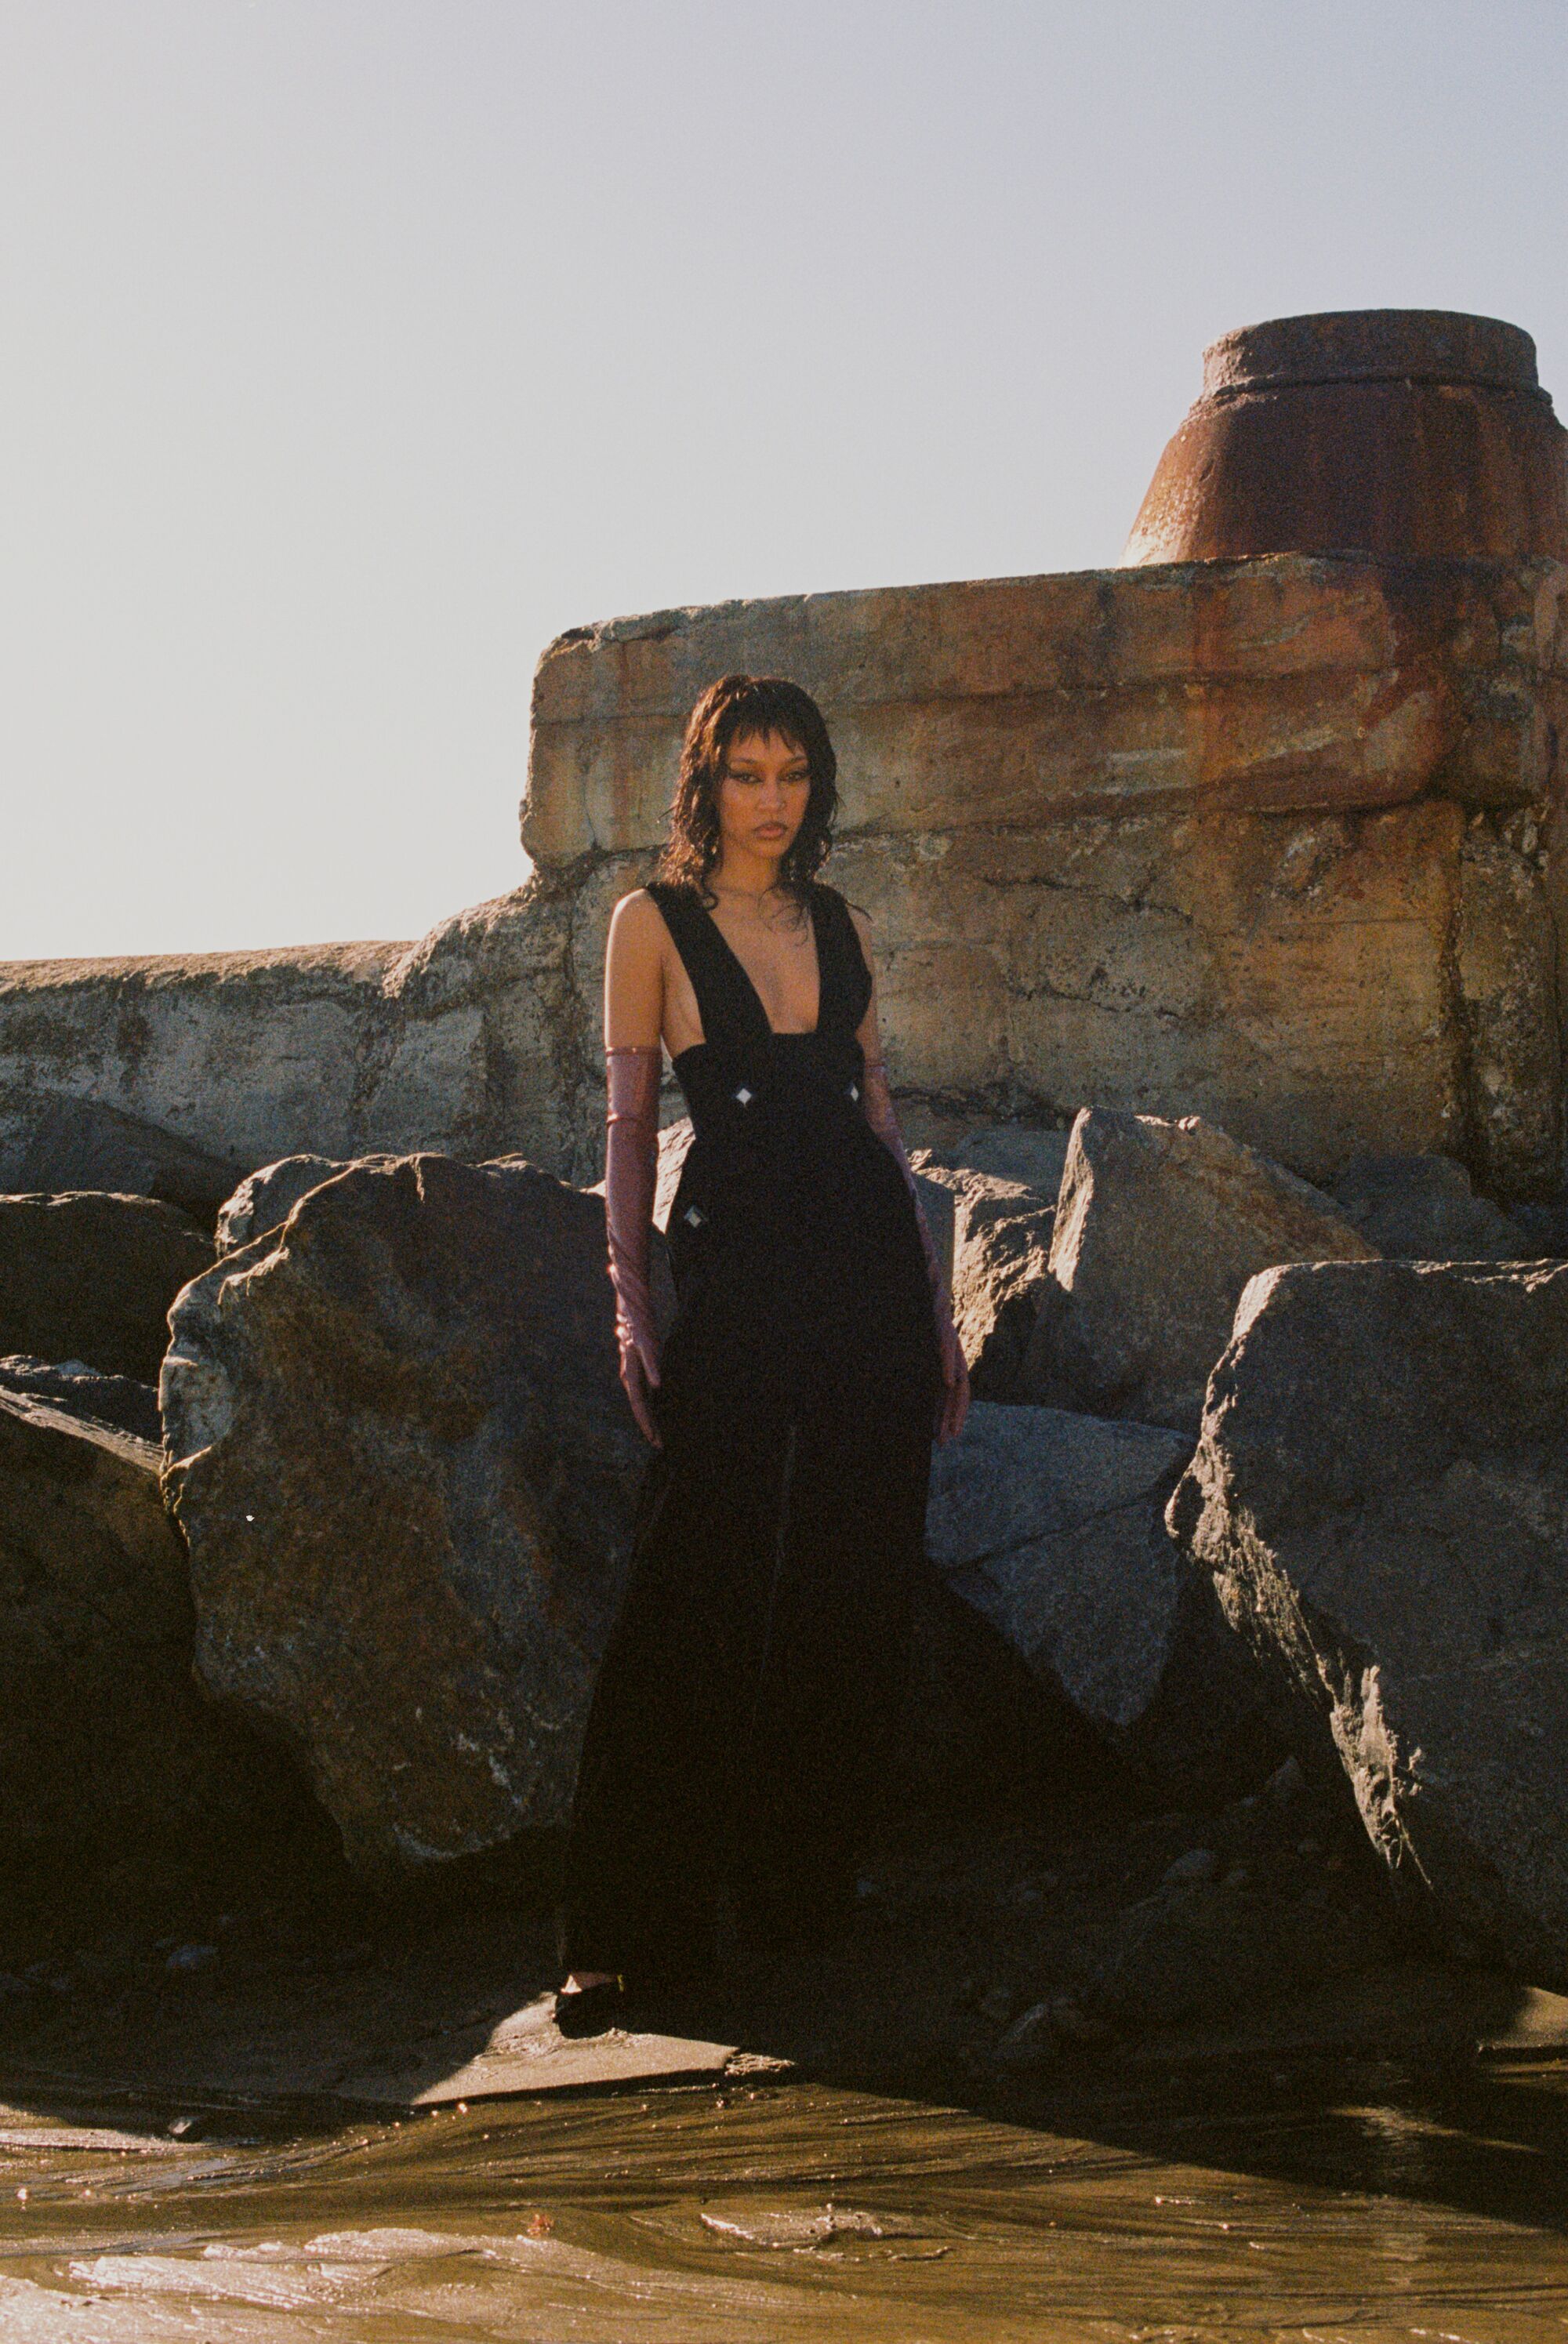 A model poses in an all-black dress on the beach, with rocks behind her.